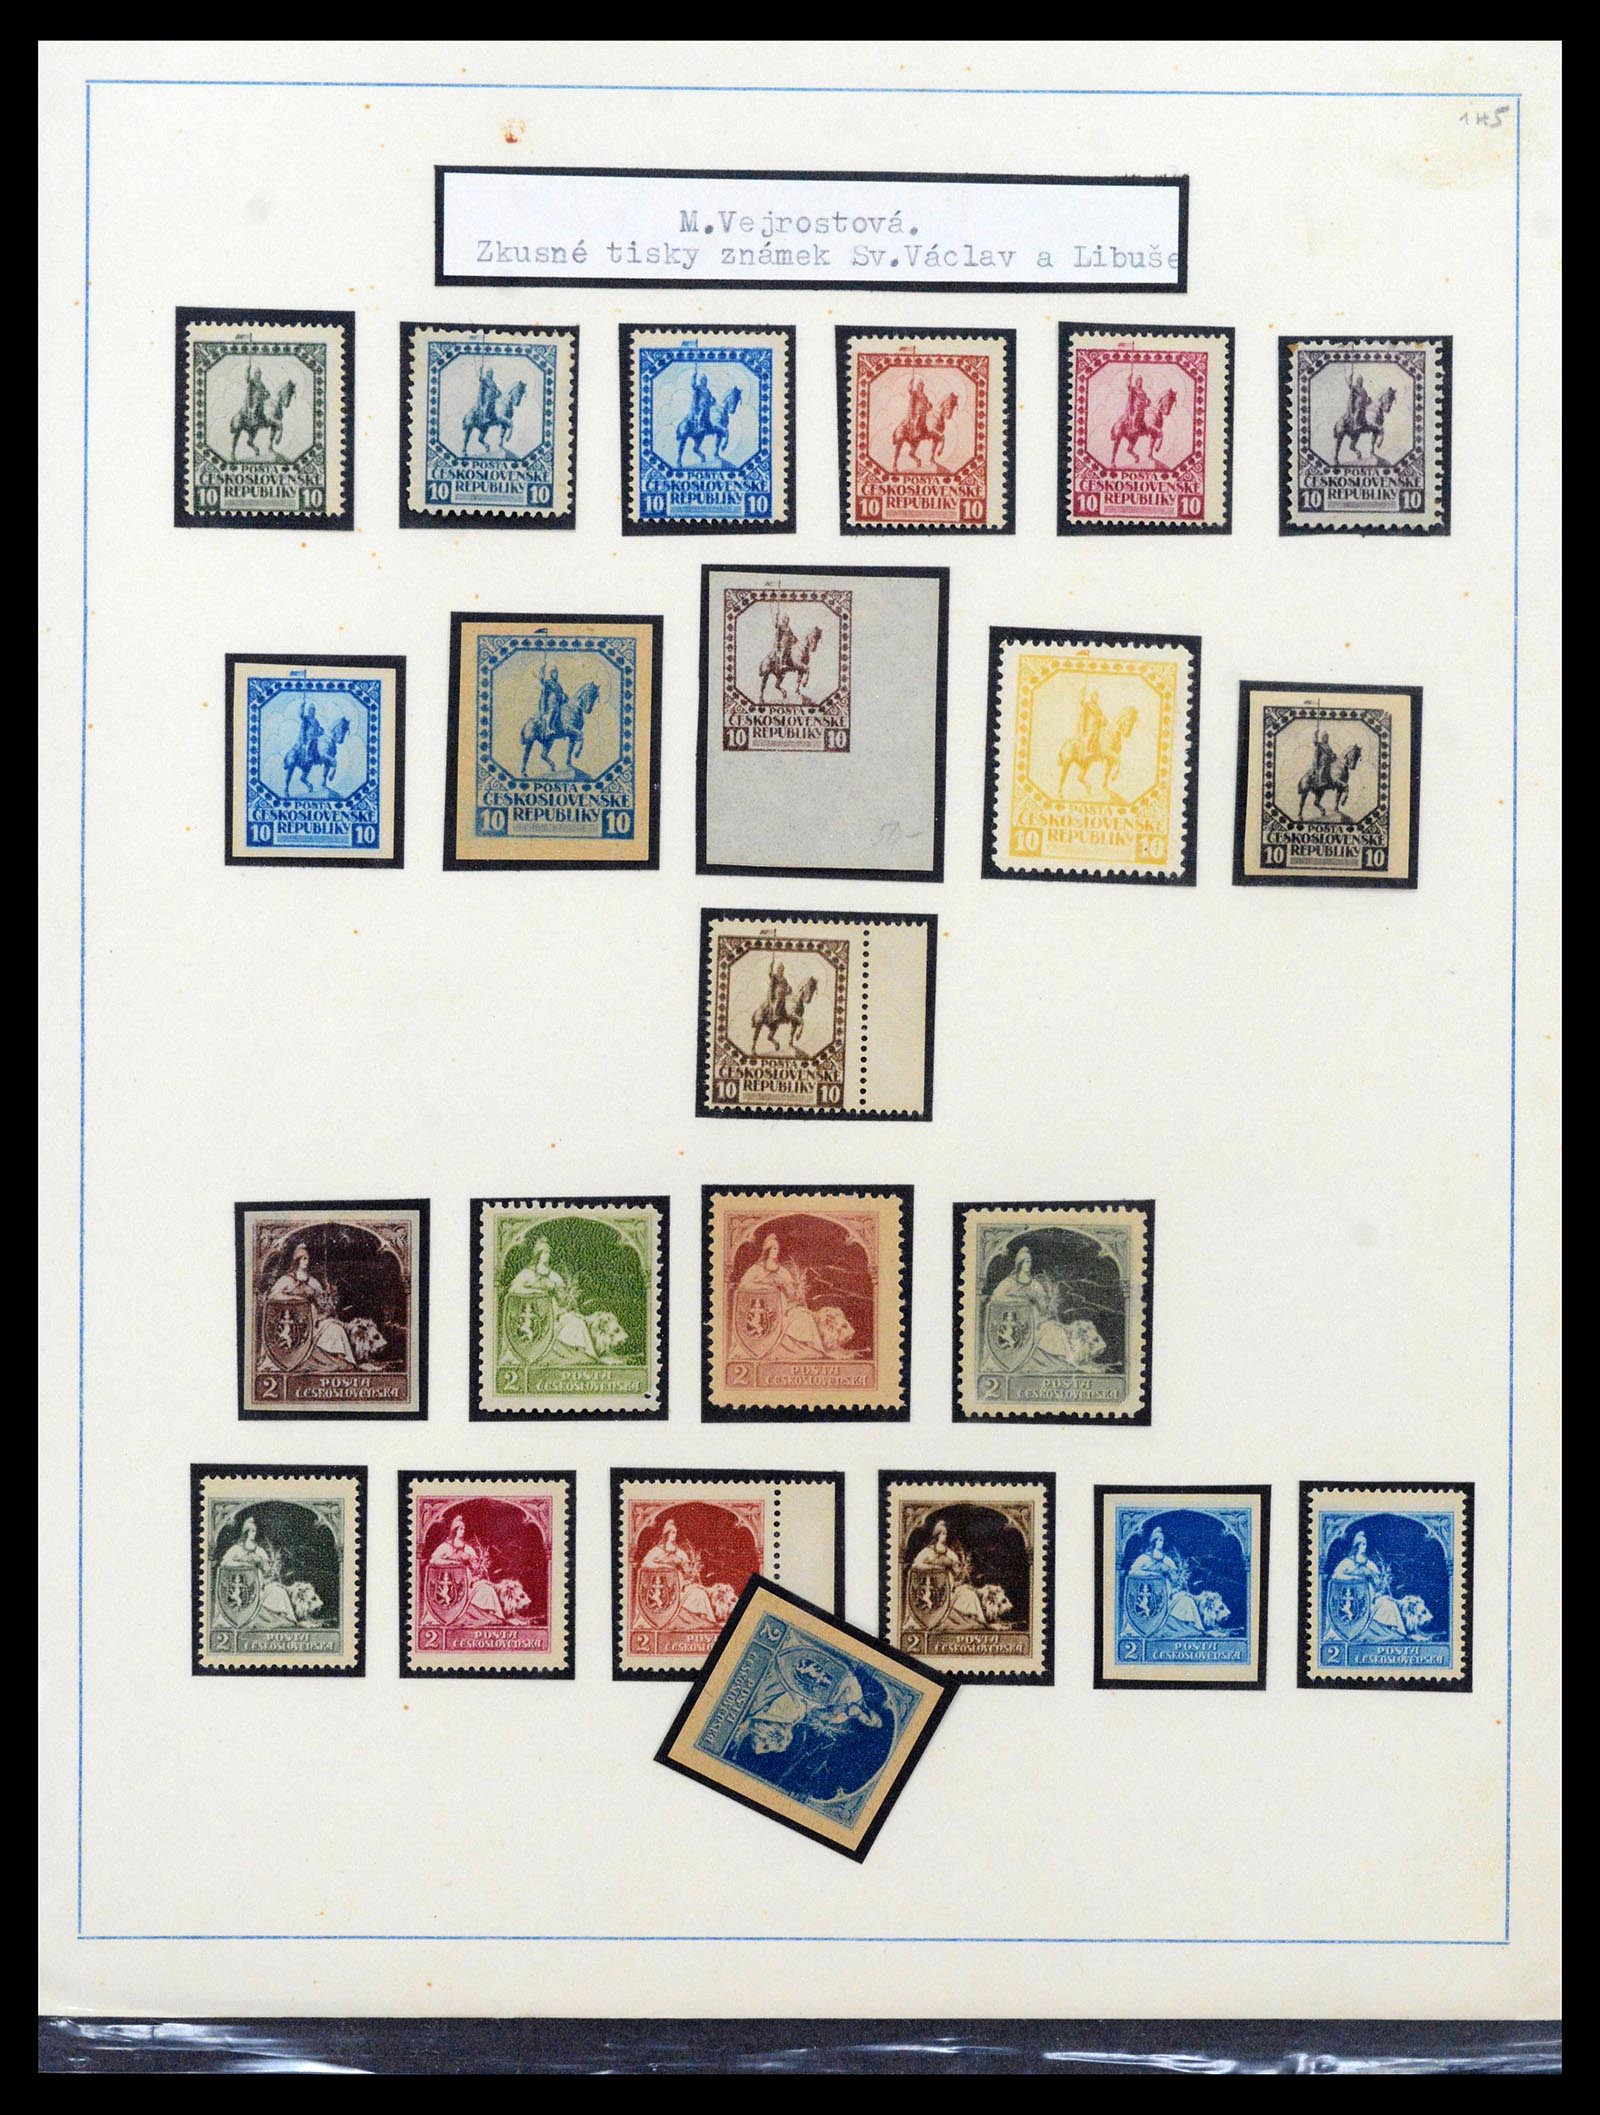 39165 0019 - Stamp collection 39165 Czechoslovakia specialised 1919-1970.